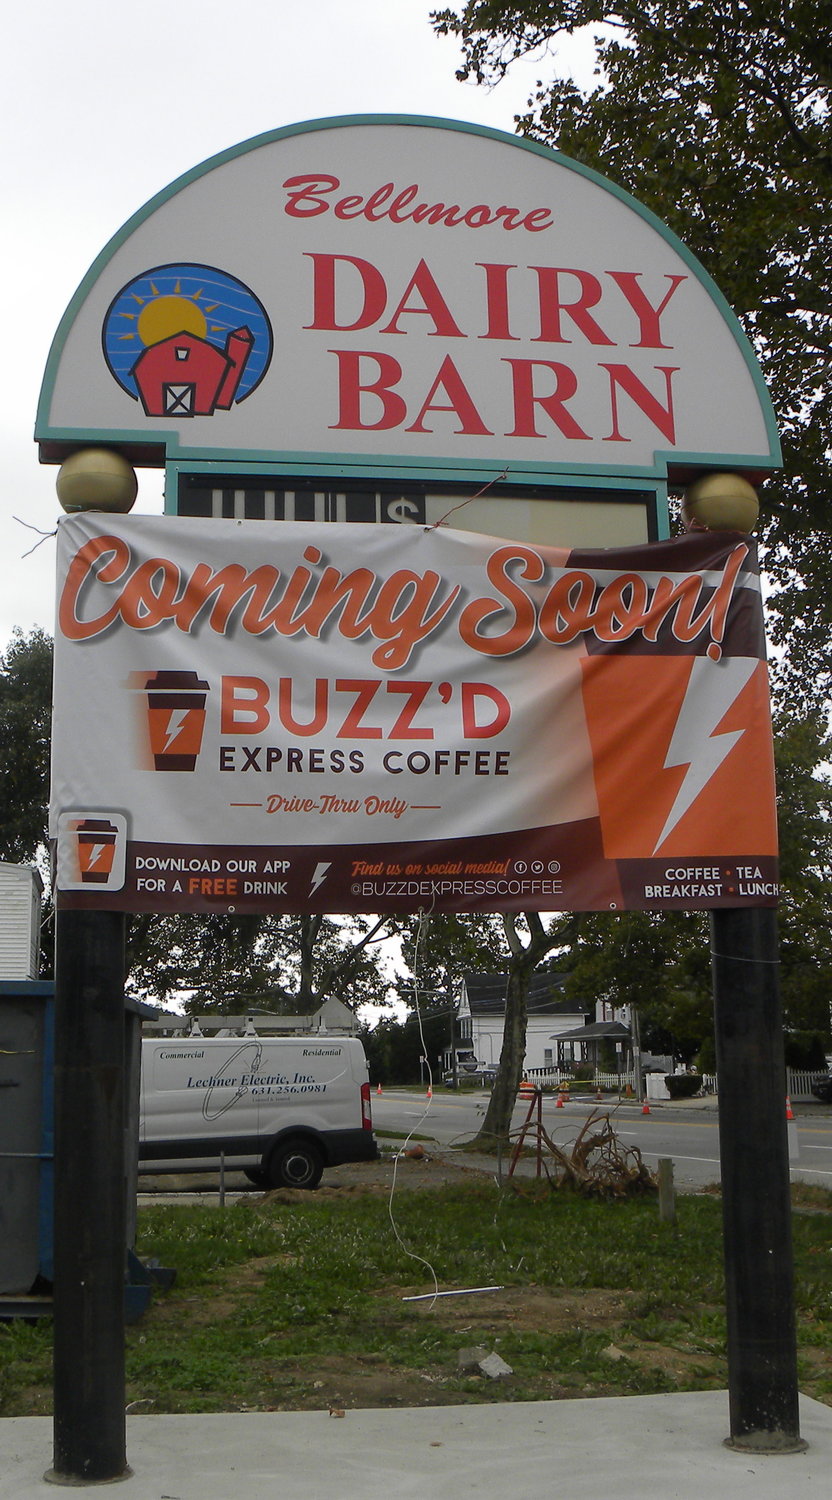 Buzz’d Express Coffee will open its flagship location, replacing the vacant lot that was once home to the Bellmore Dairy Barn